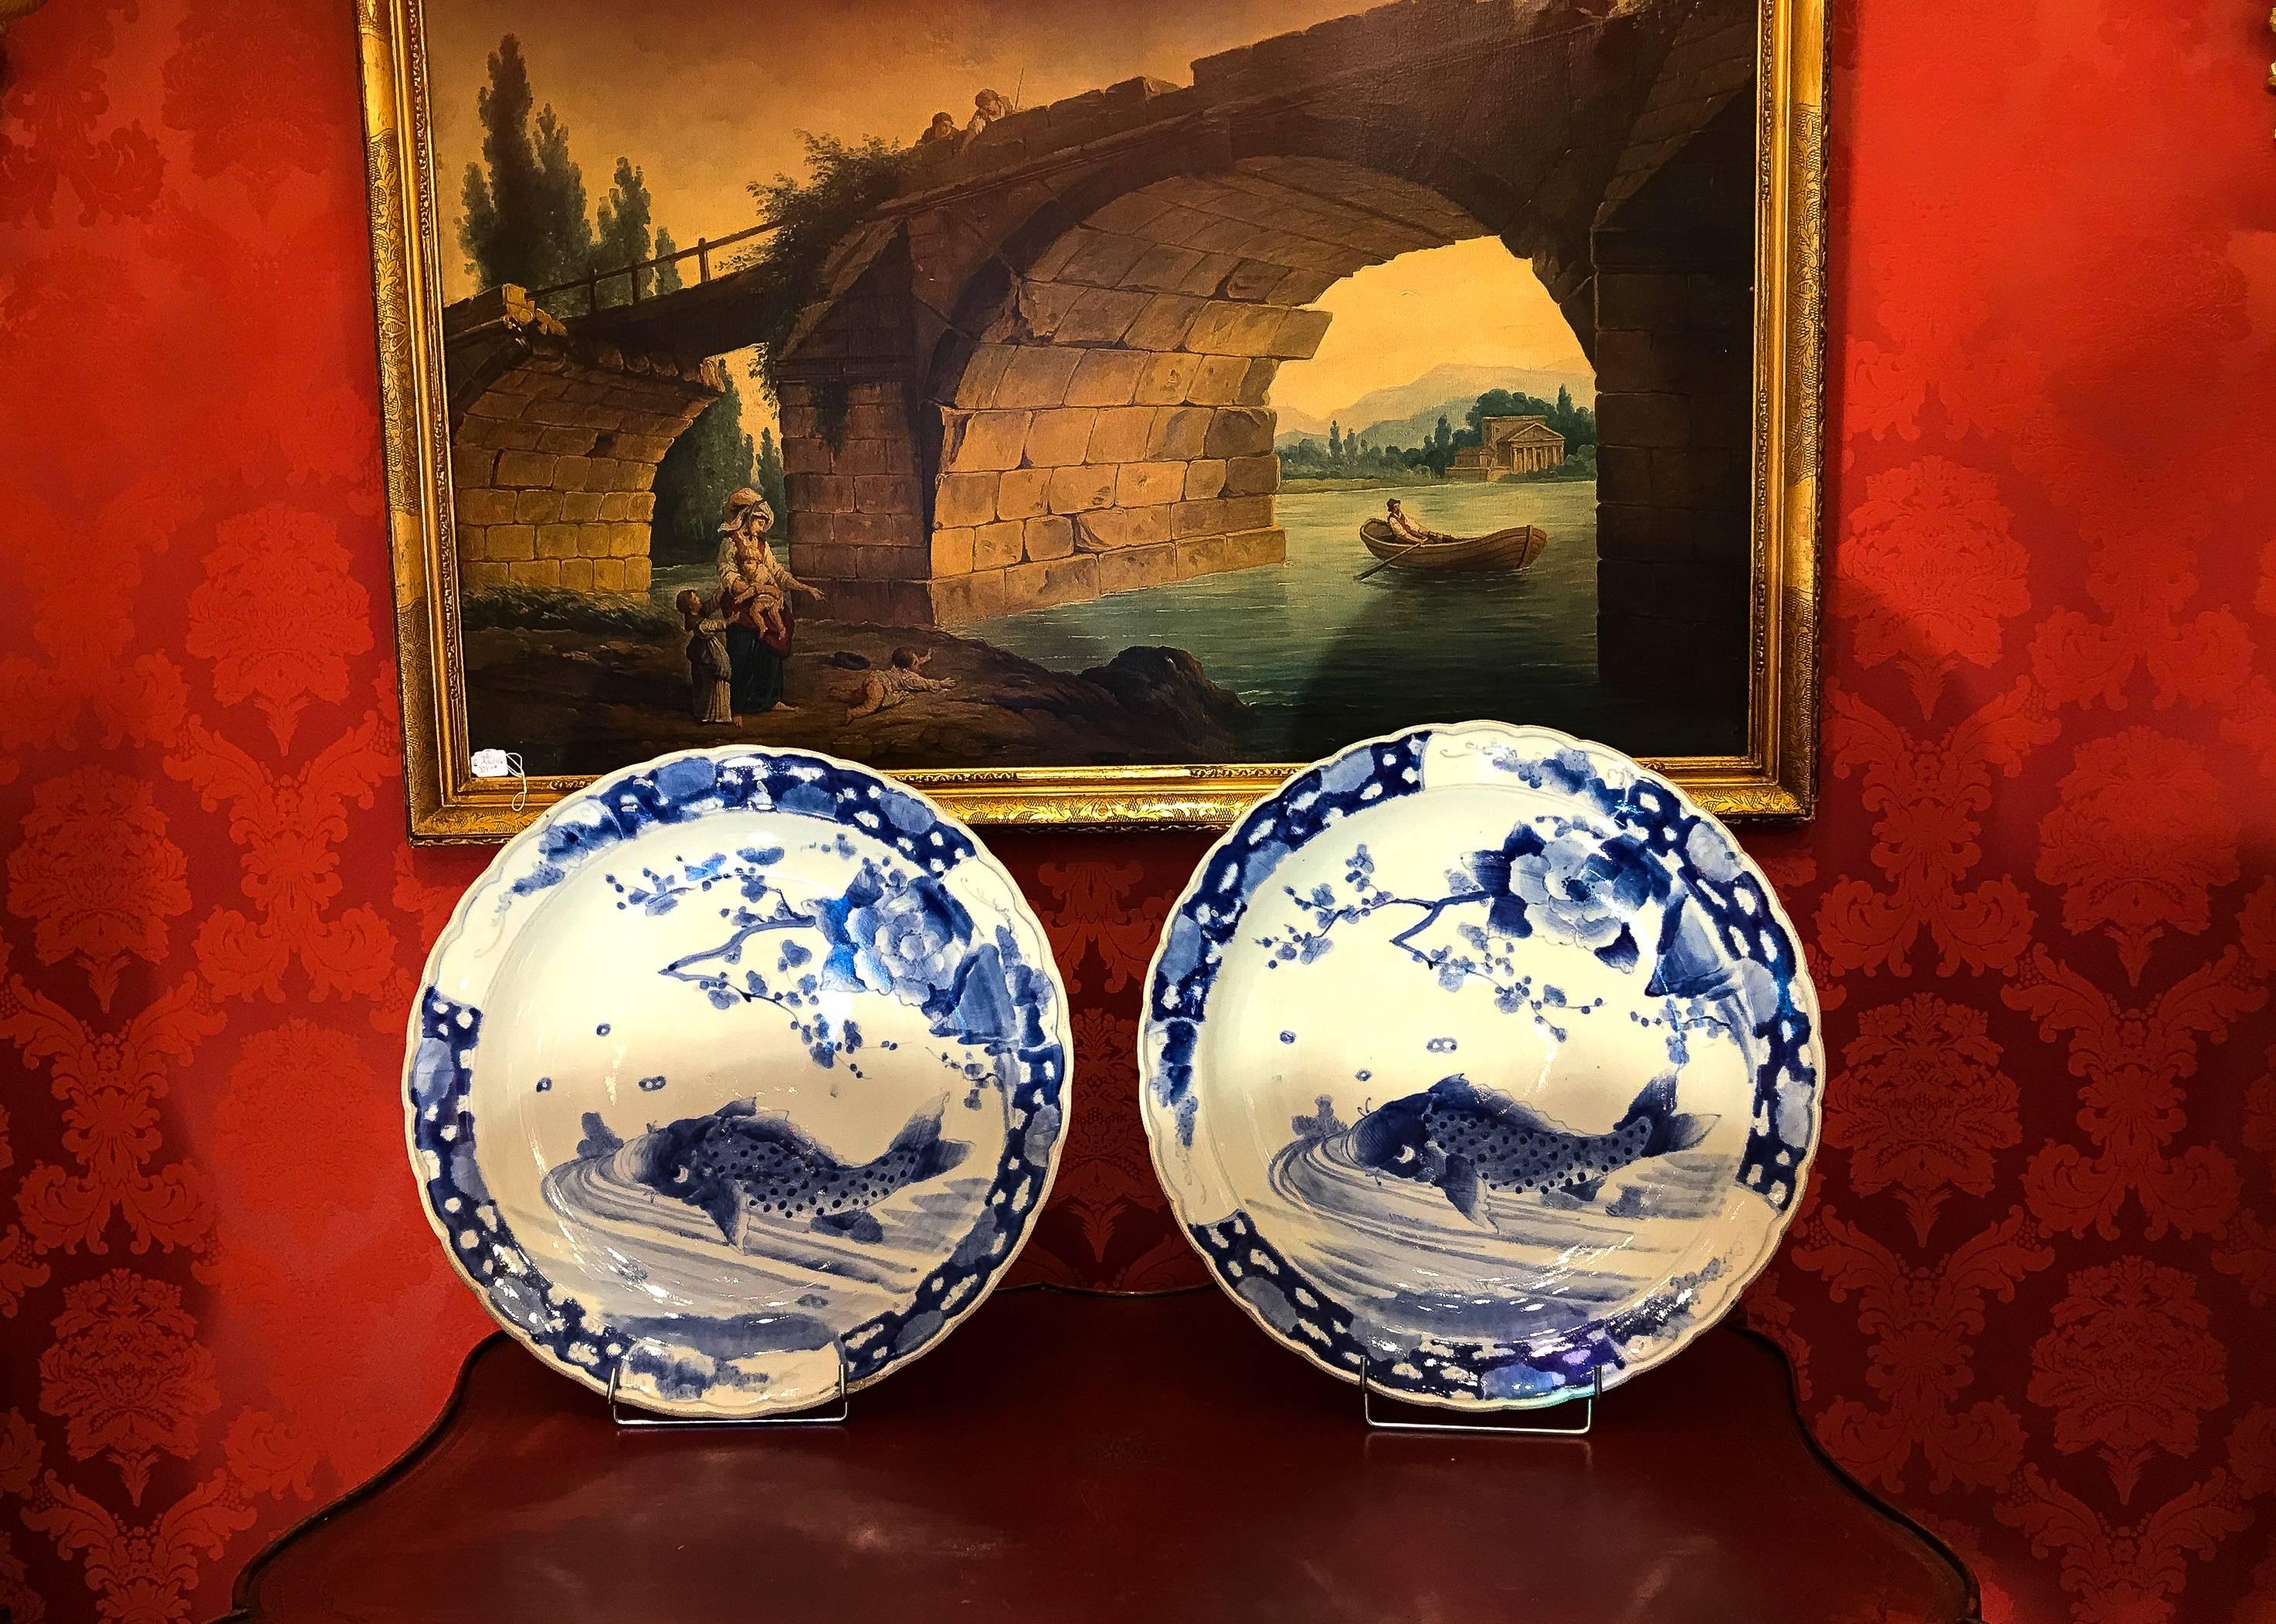 A magnificent large pair of 19th century Japan porcelain dishes, depicting Koï carps in hand-painted in underglaze blue cobalt color.
Beautiful work by Arita porcelain manufactures, probably Meiji period, mid-19th century.

Dimension: Diameter